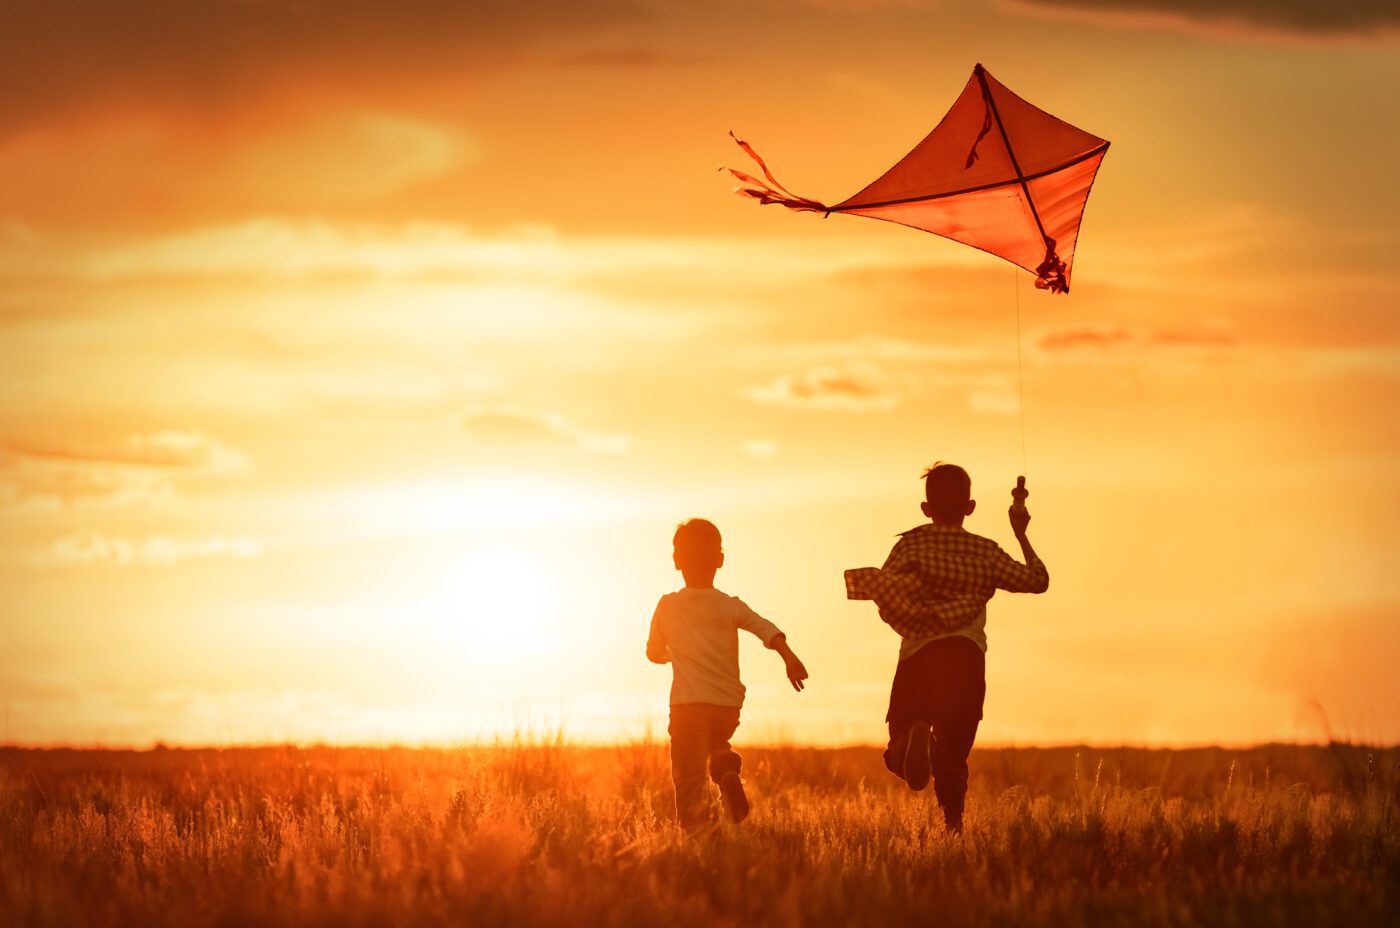 Children, Amir and Hassan fly a kite in the field at sunset, in Afghanistan in the Kite Runner at the Liverpool Playhouse, inspired by Khaled Hosseini's original New York bestselling novel.